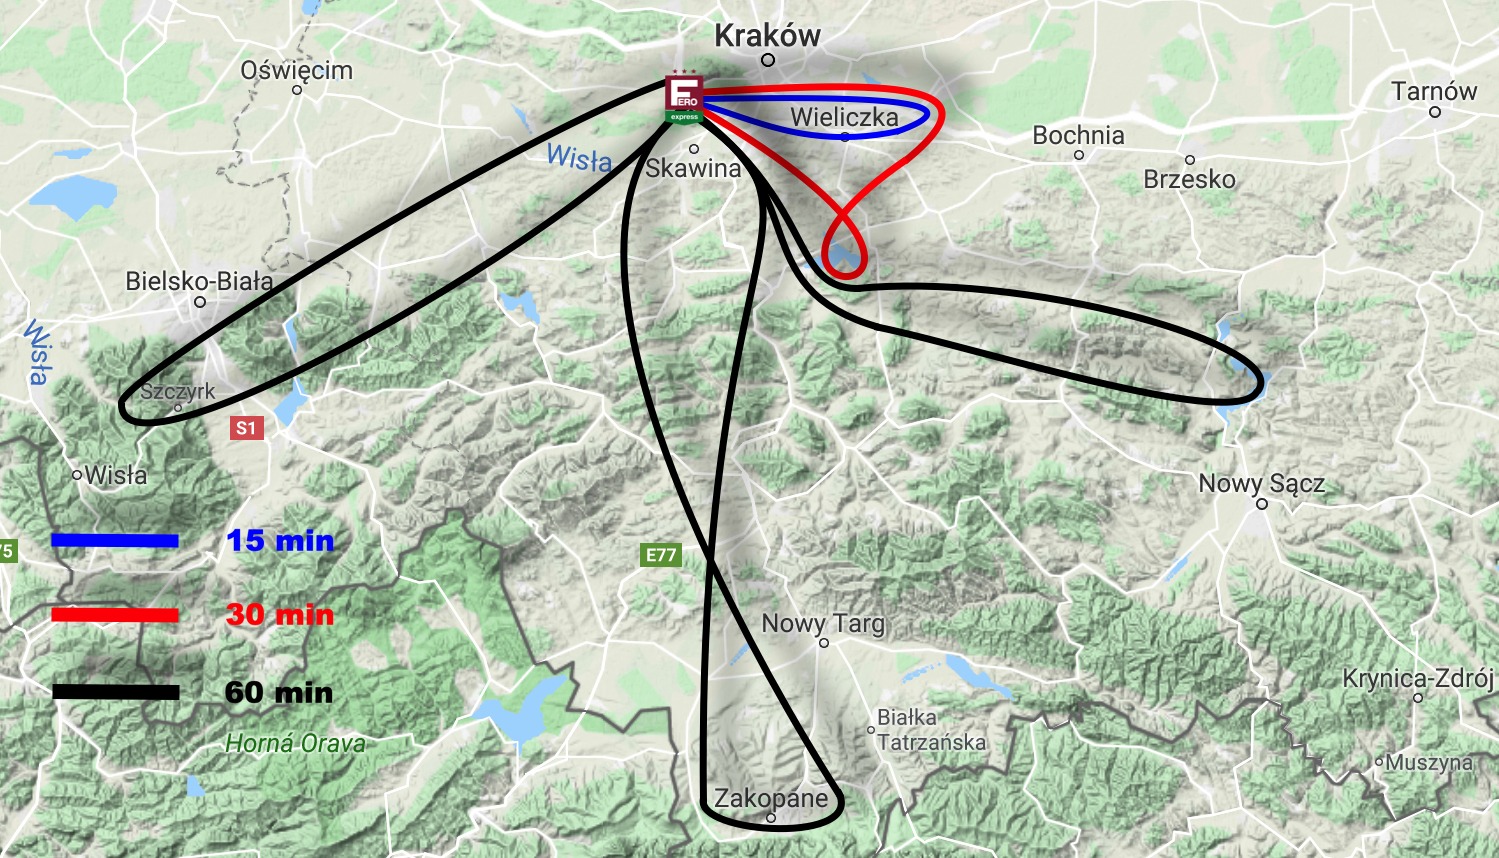 Helicopter flights Kraków - Routes by Helipoland